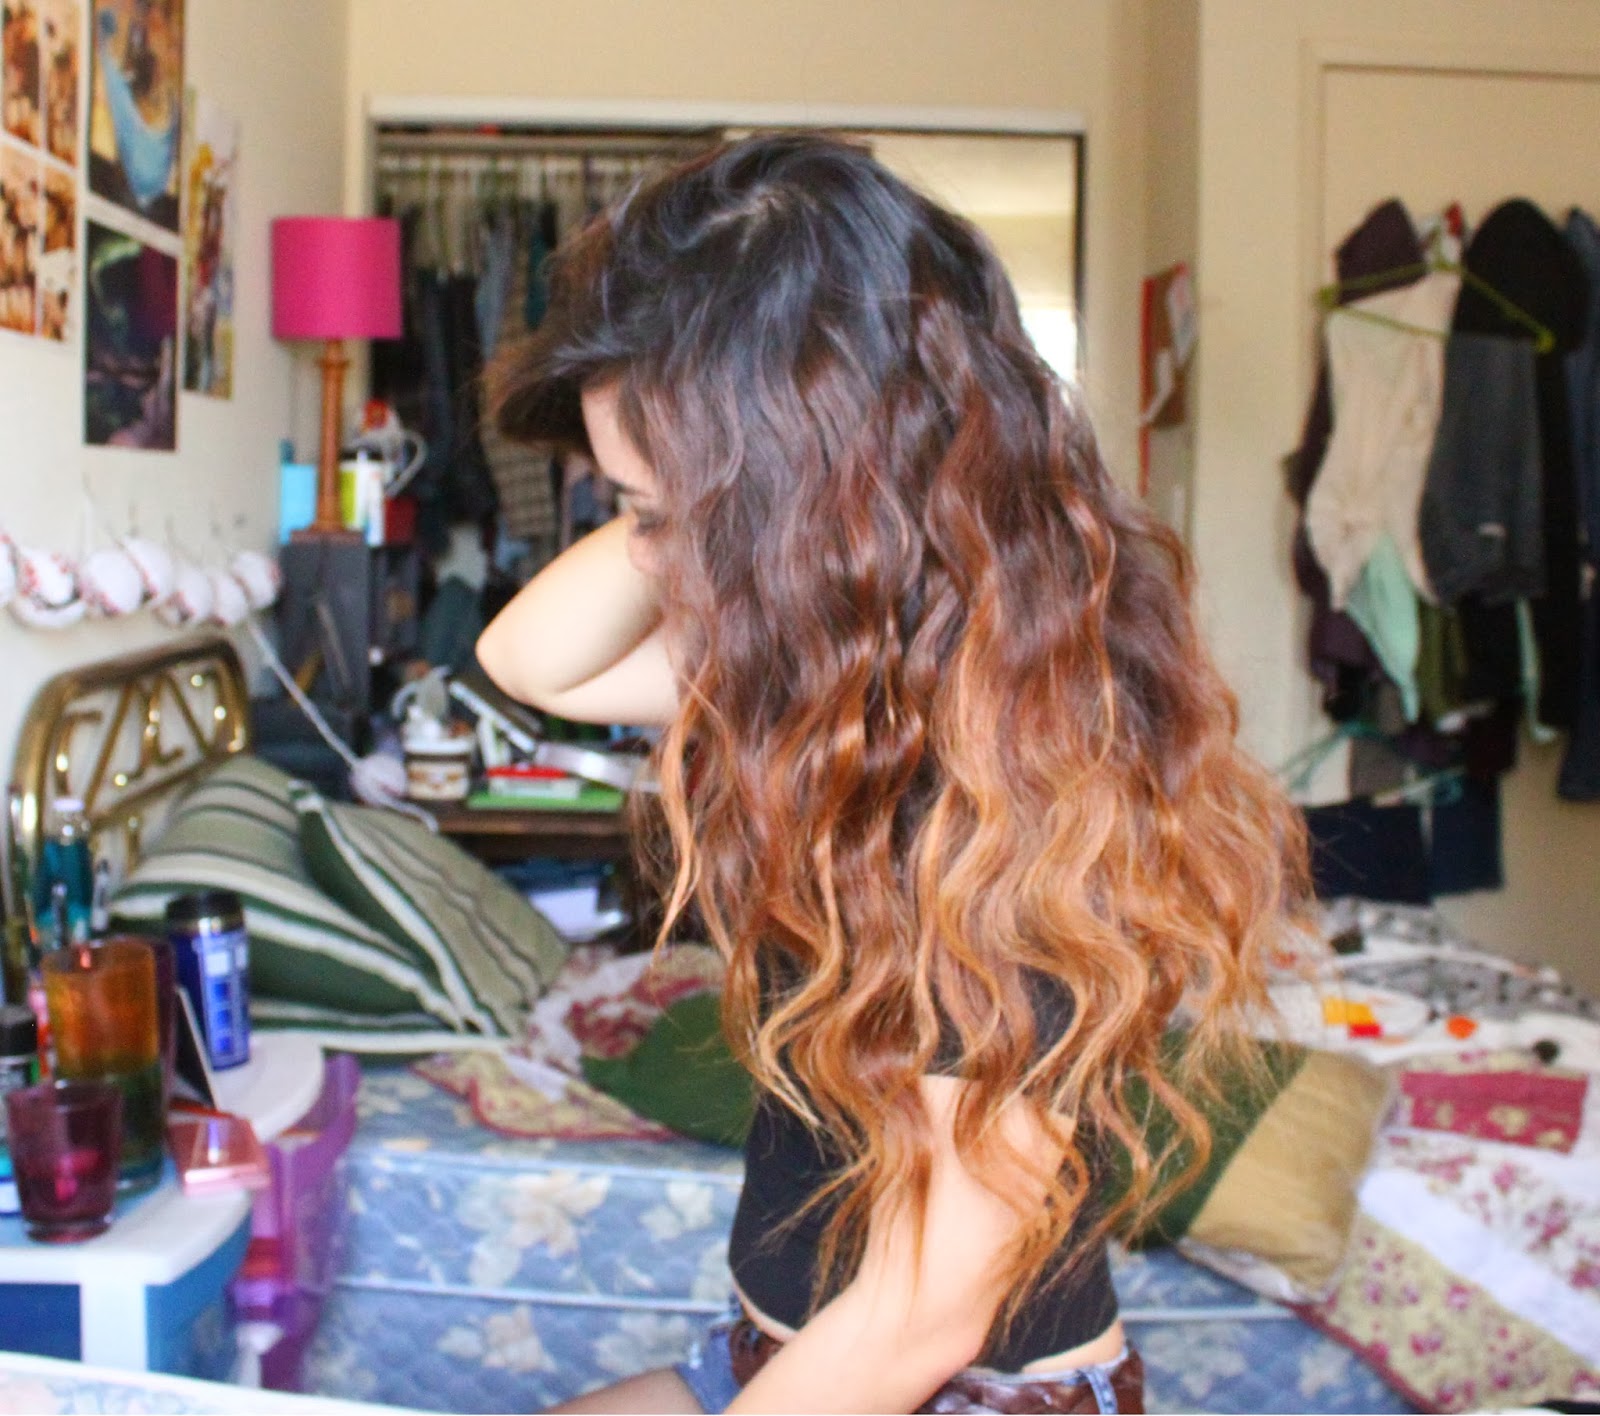 Simple Stylings: Review: Bed Head Deep Waver